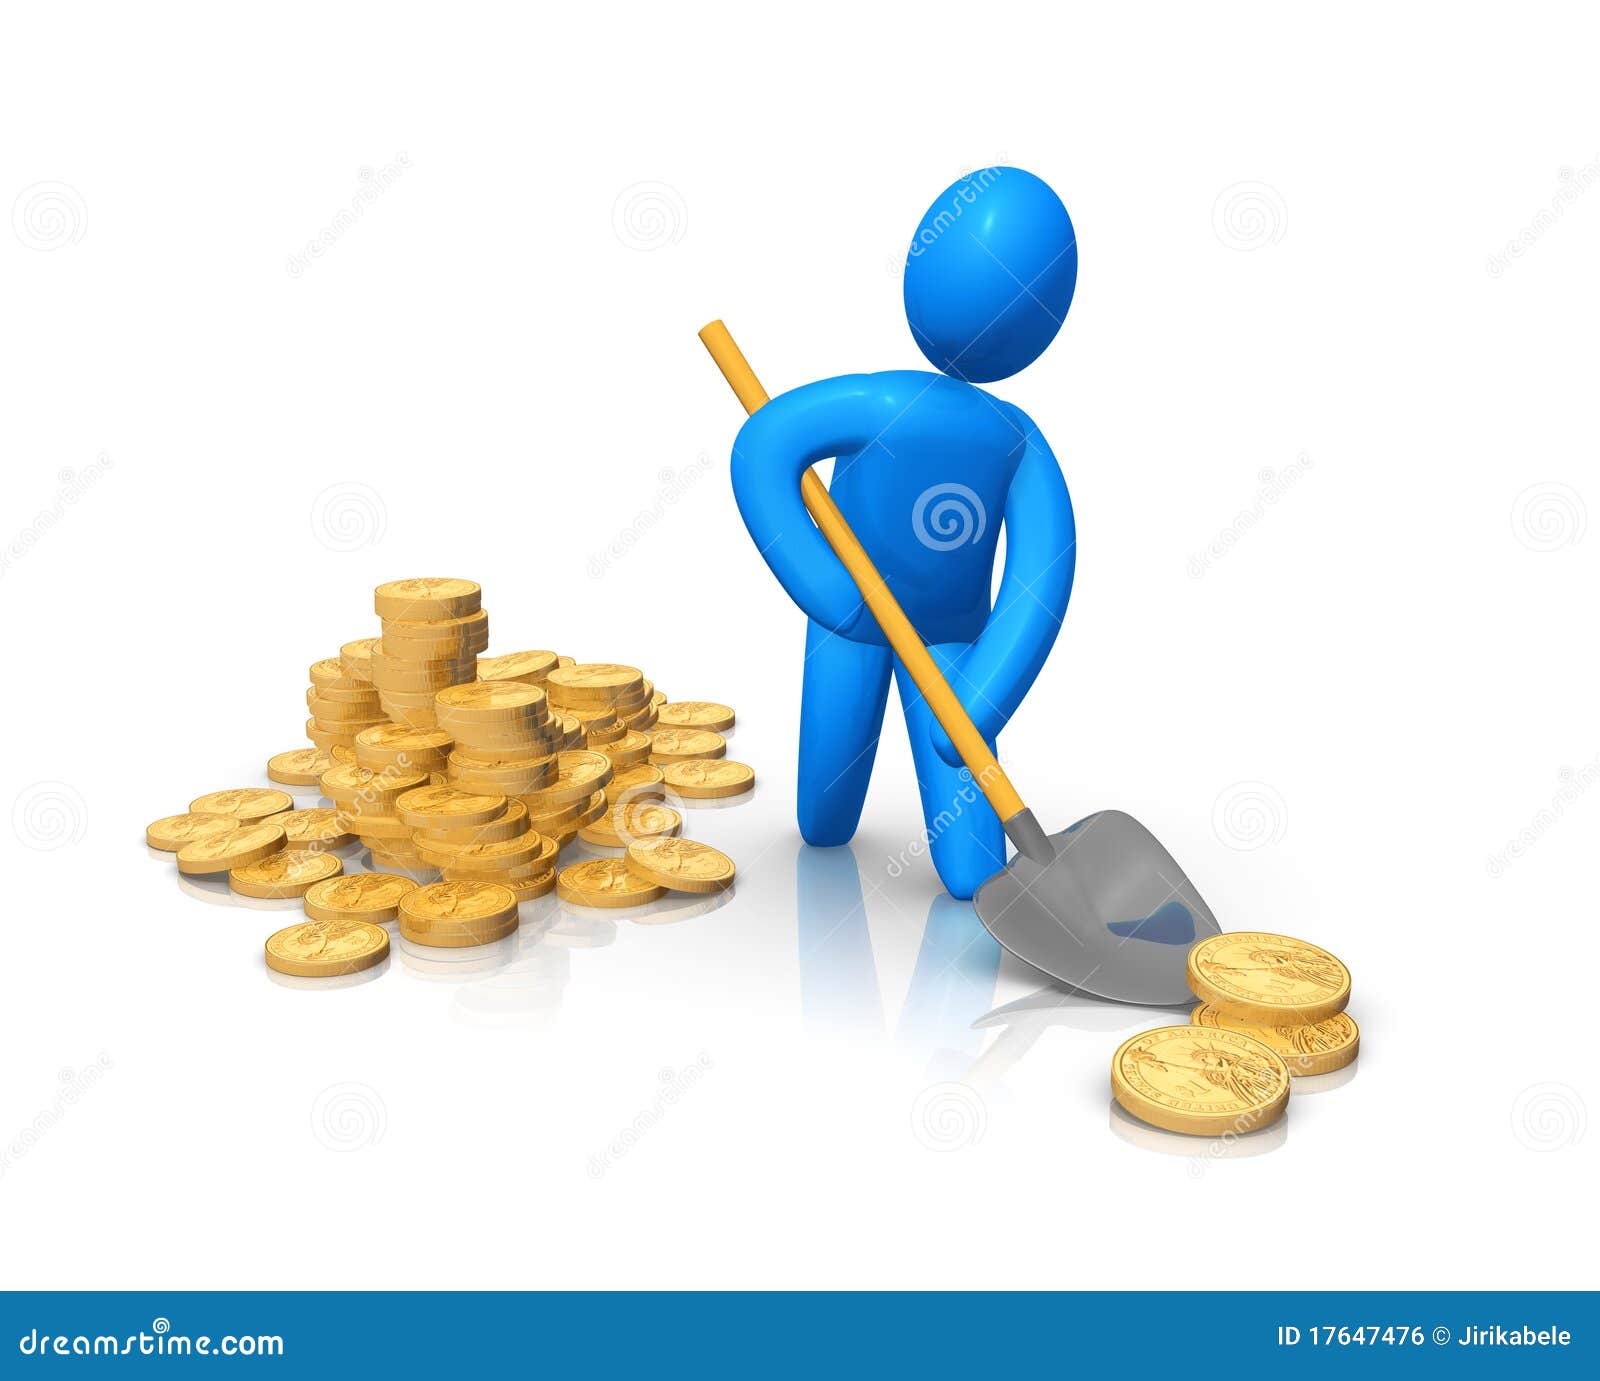 moving money clipart - photo #8